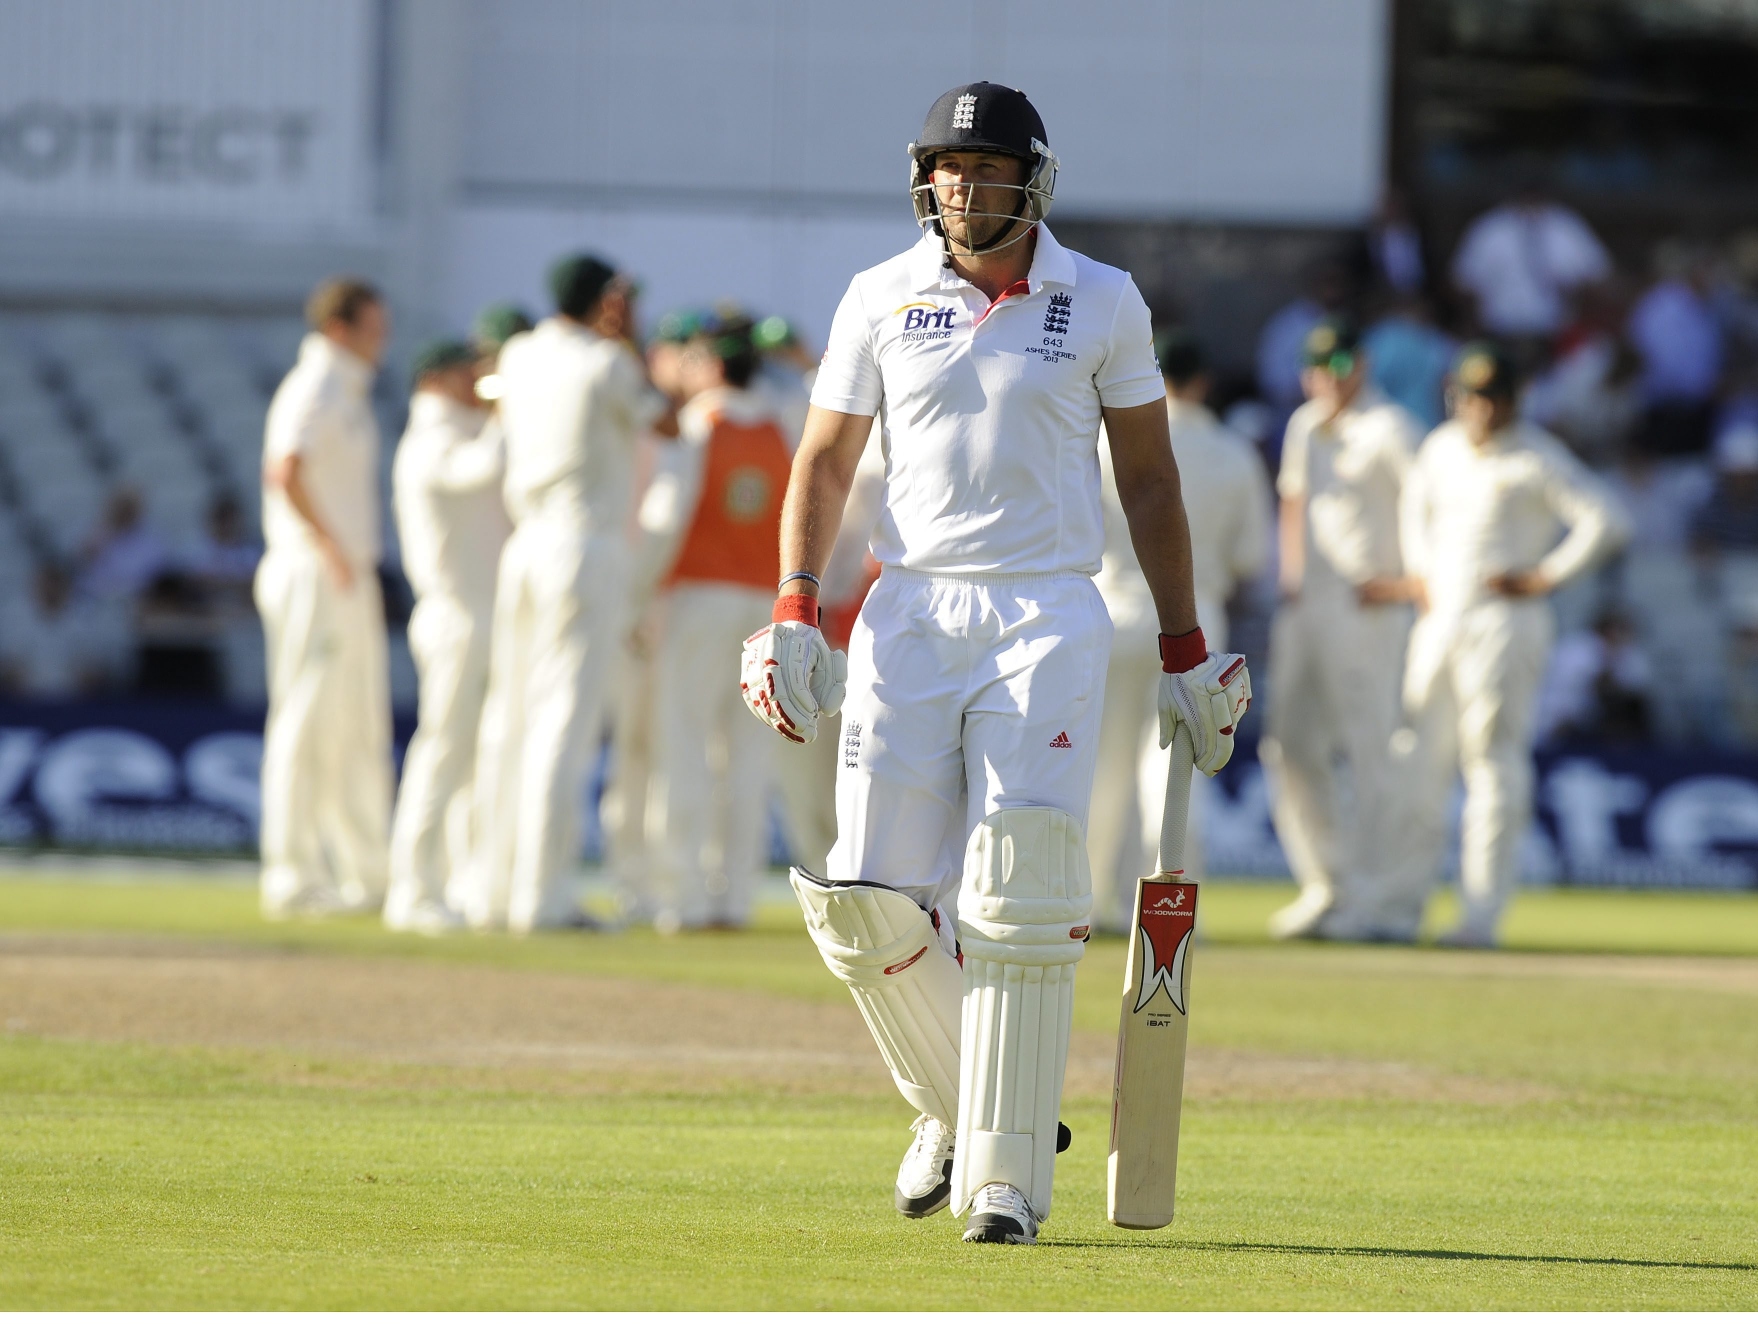 England's Tim Bresnan after being bowled out by Australia's Peter Siddle. Photo: EPA